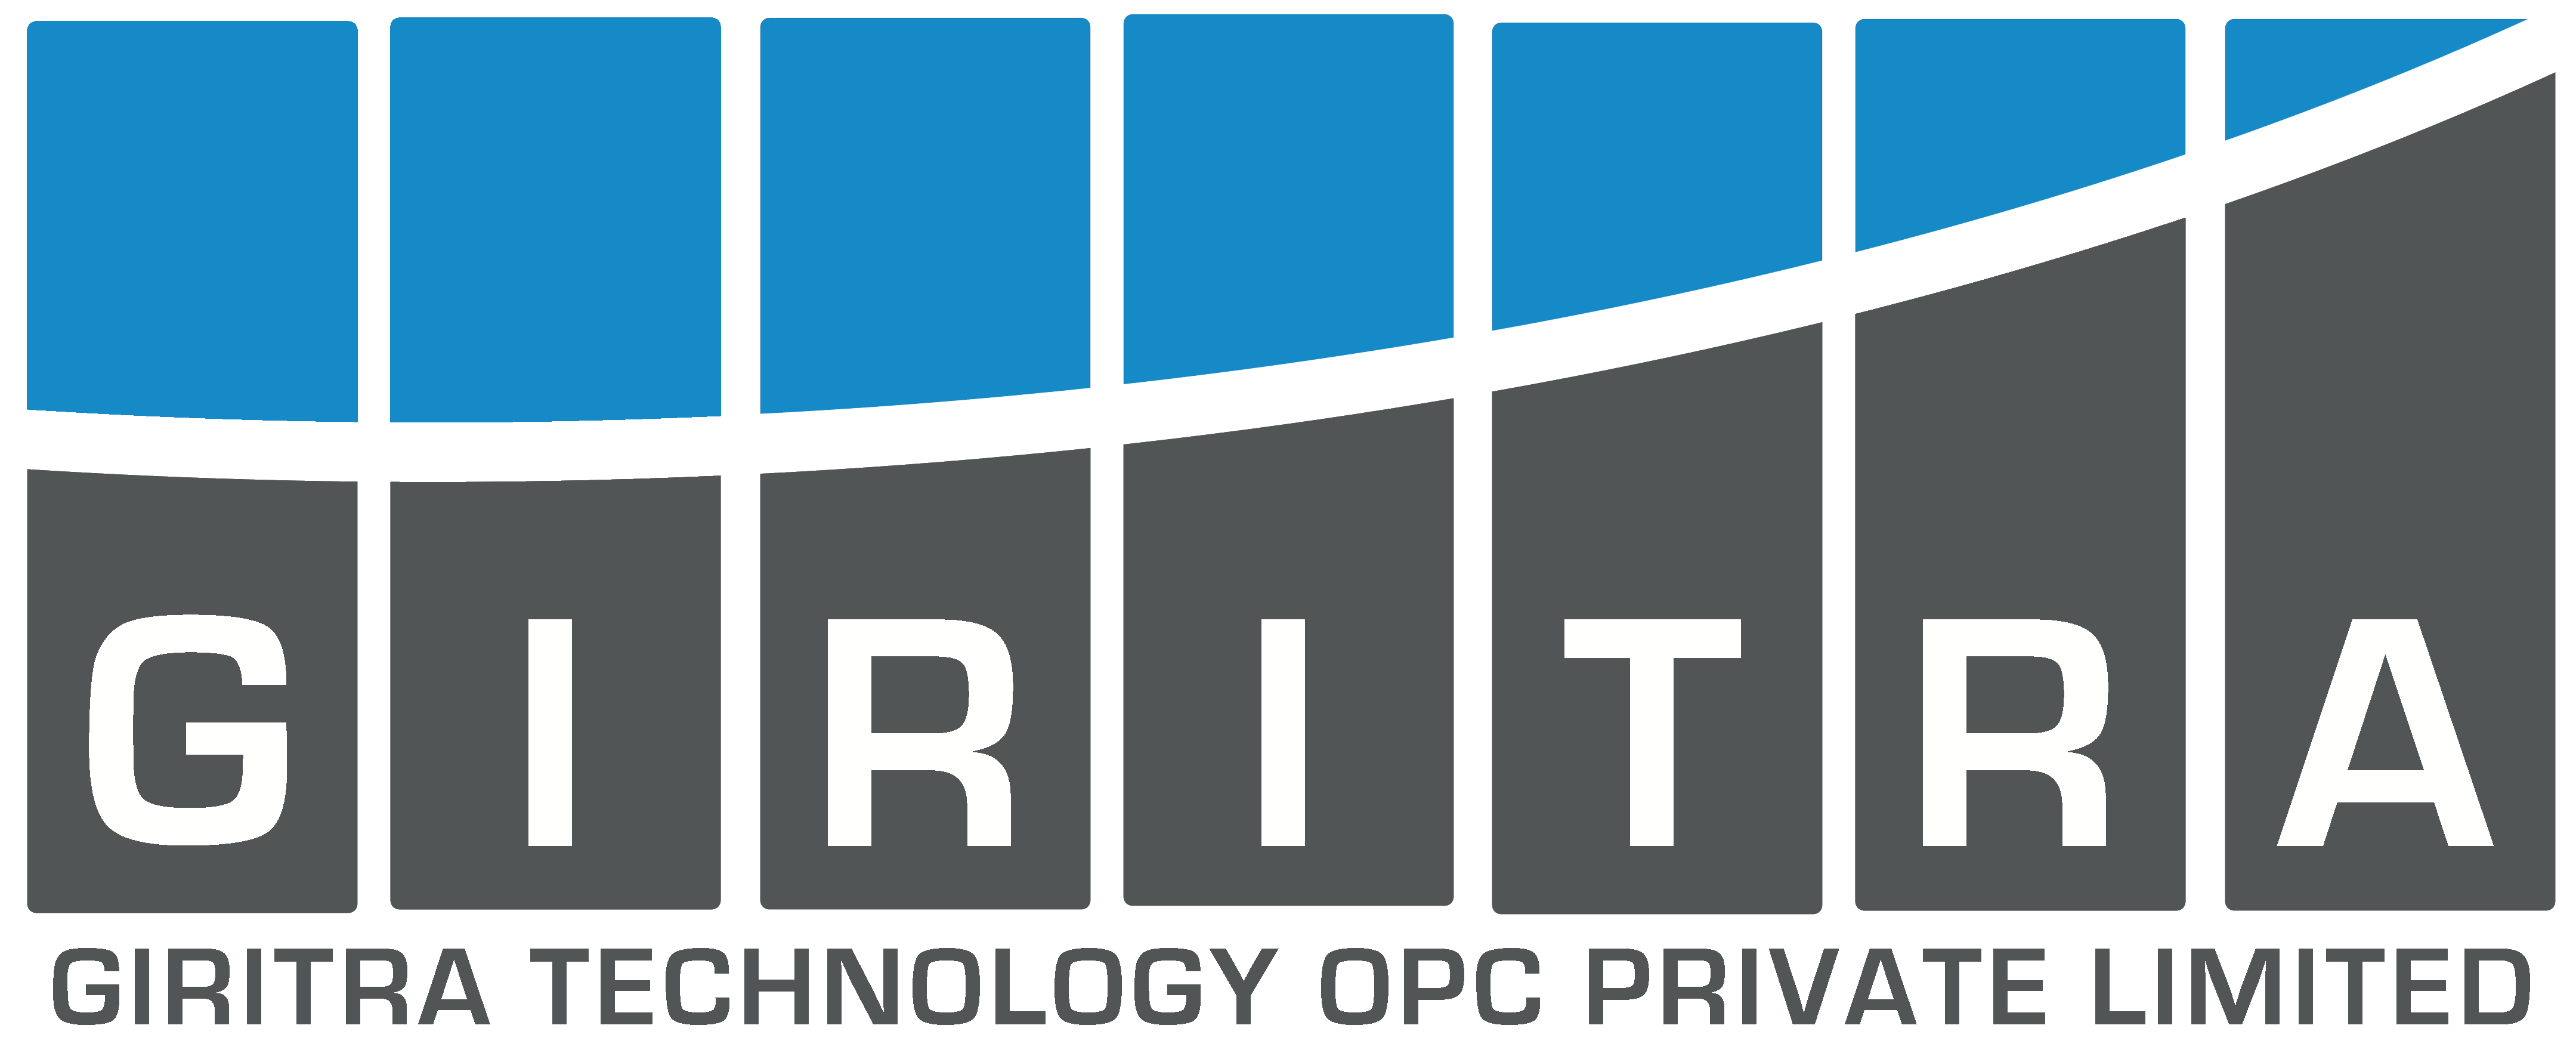 Giritra Technology (OPC) Private Limited